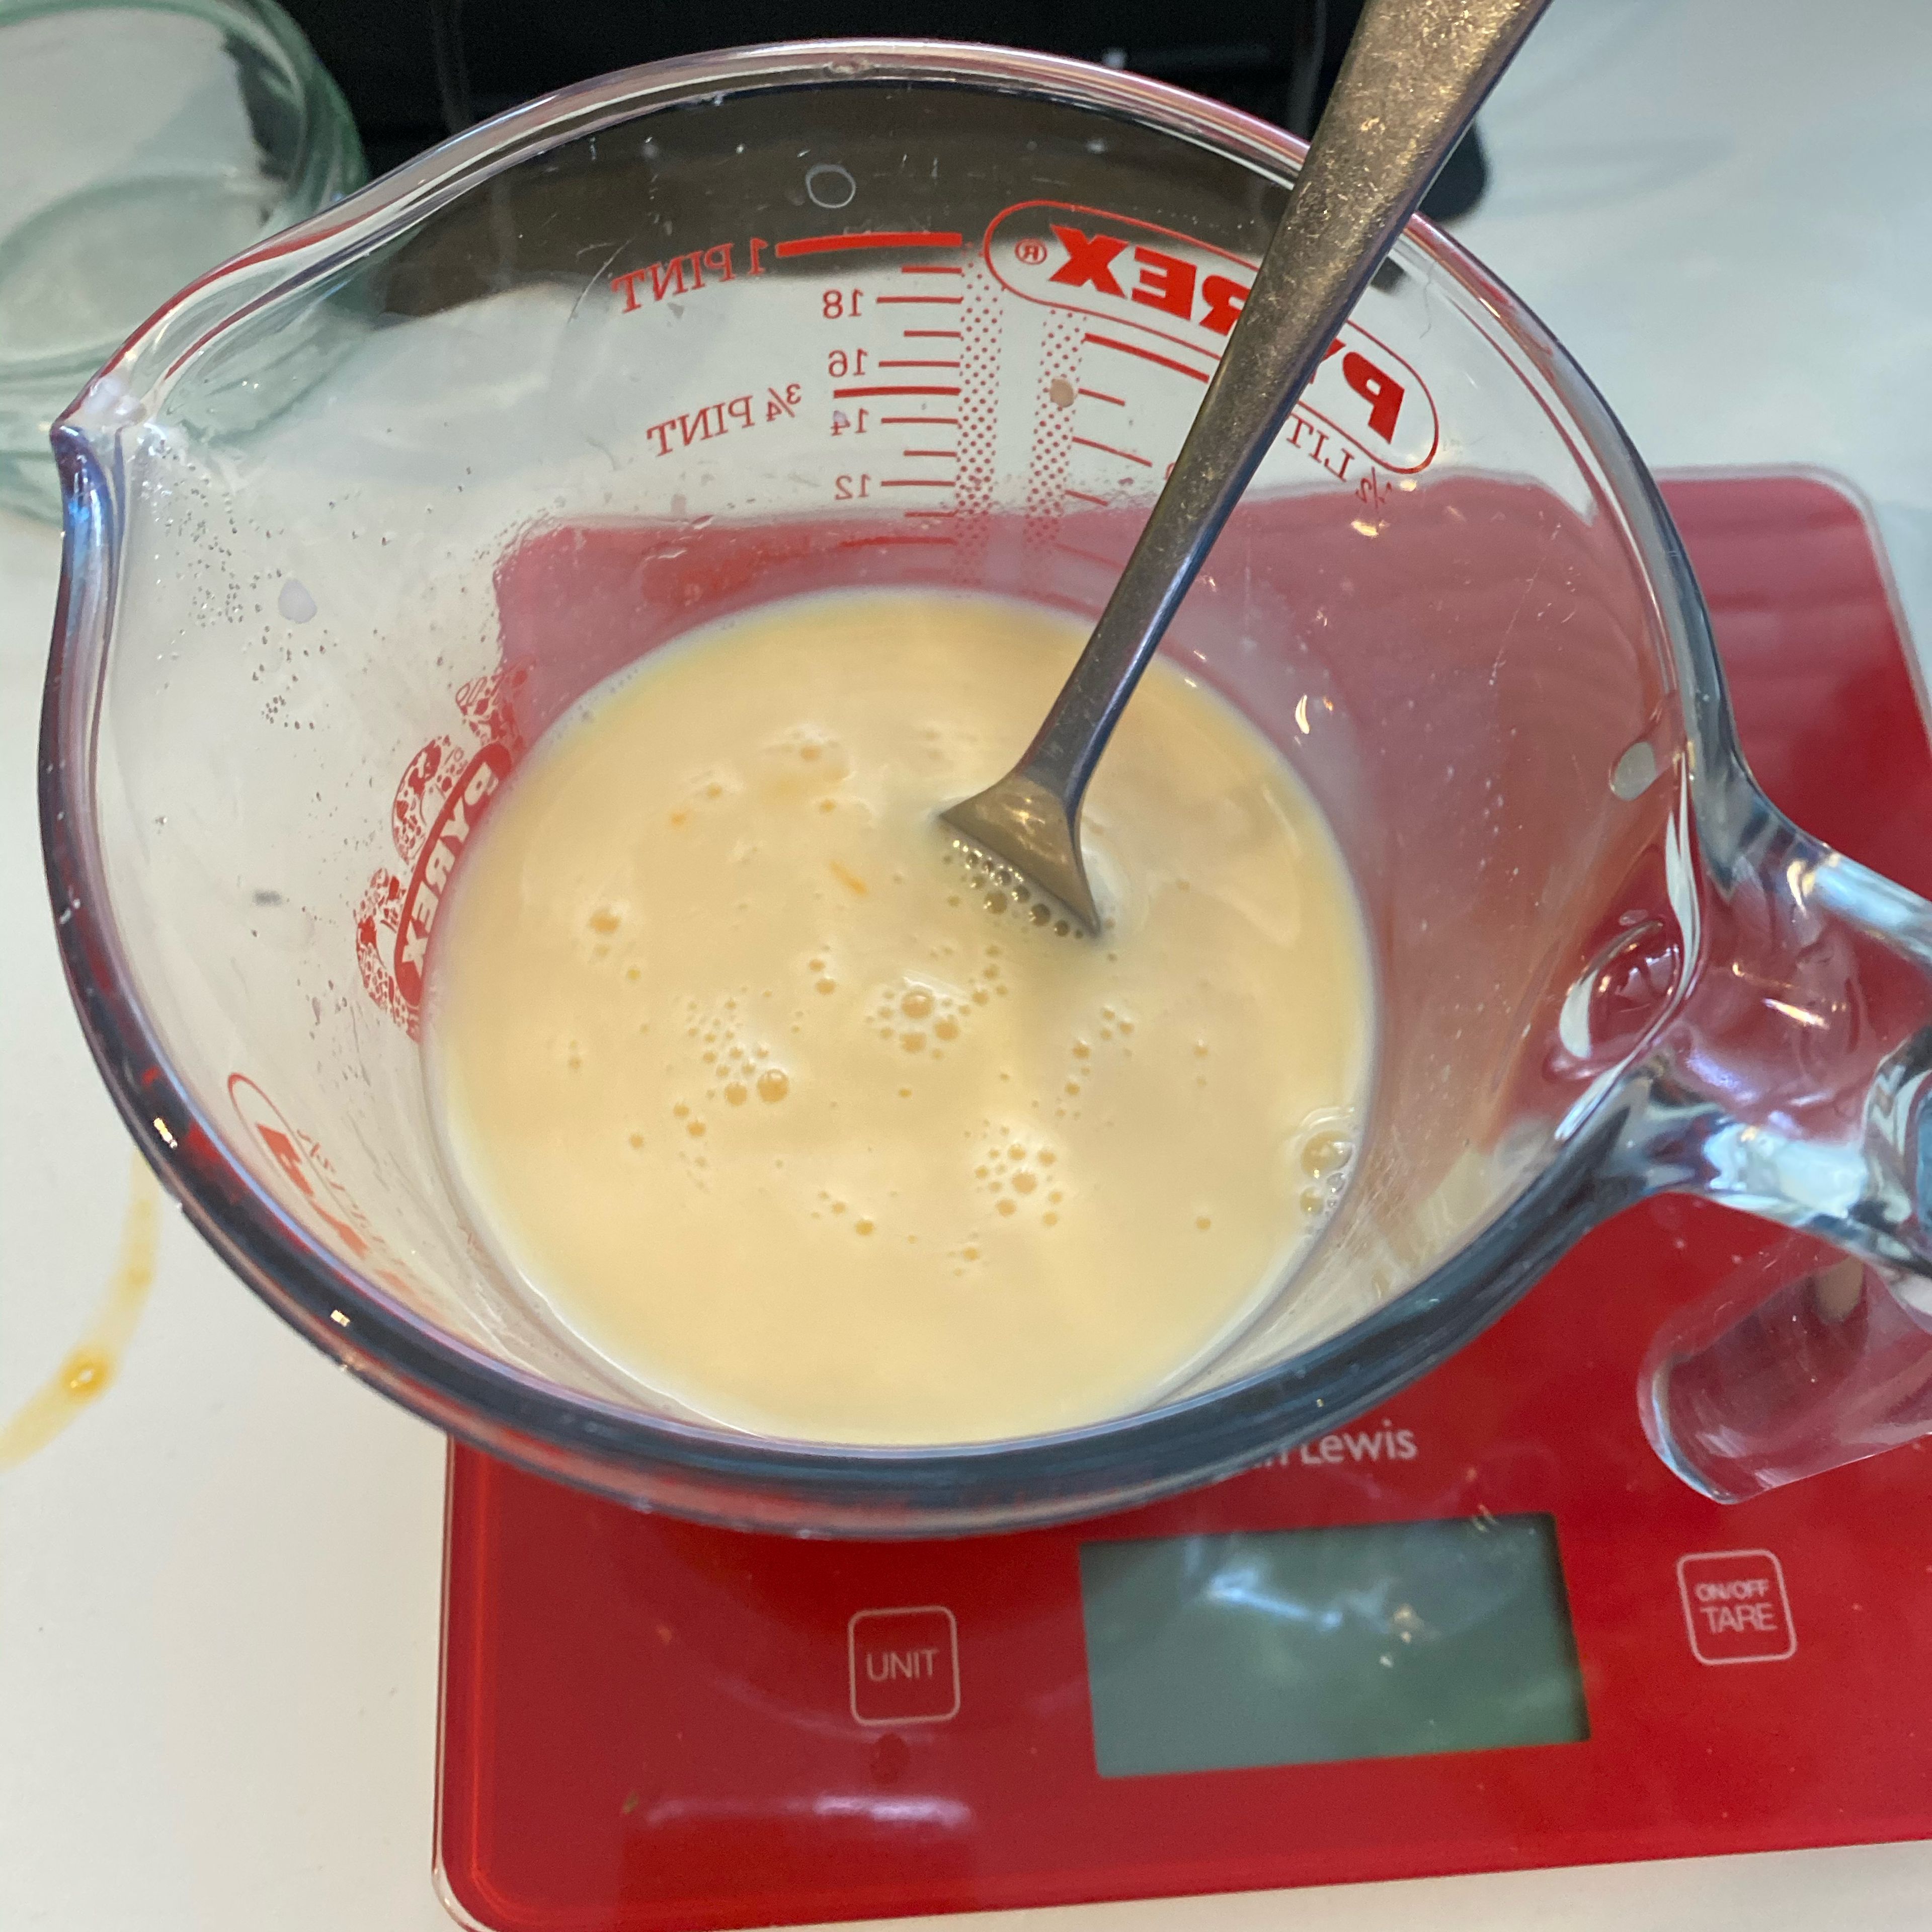 In a jug, mix the milk, 1 half of the egg mixture, caster sugar and the vanilla extract.